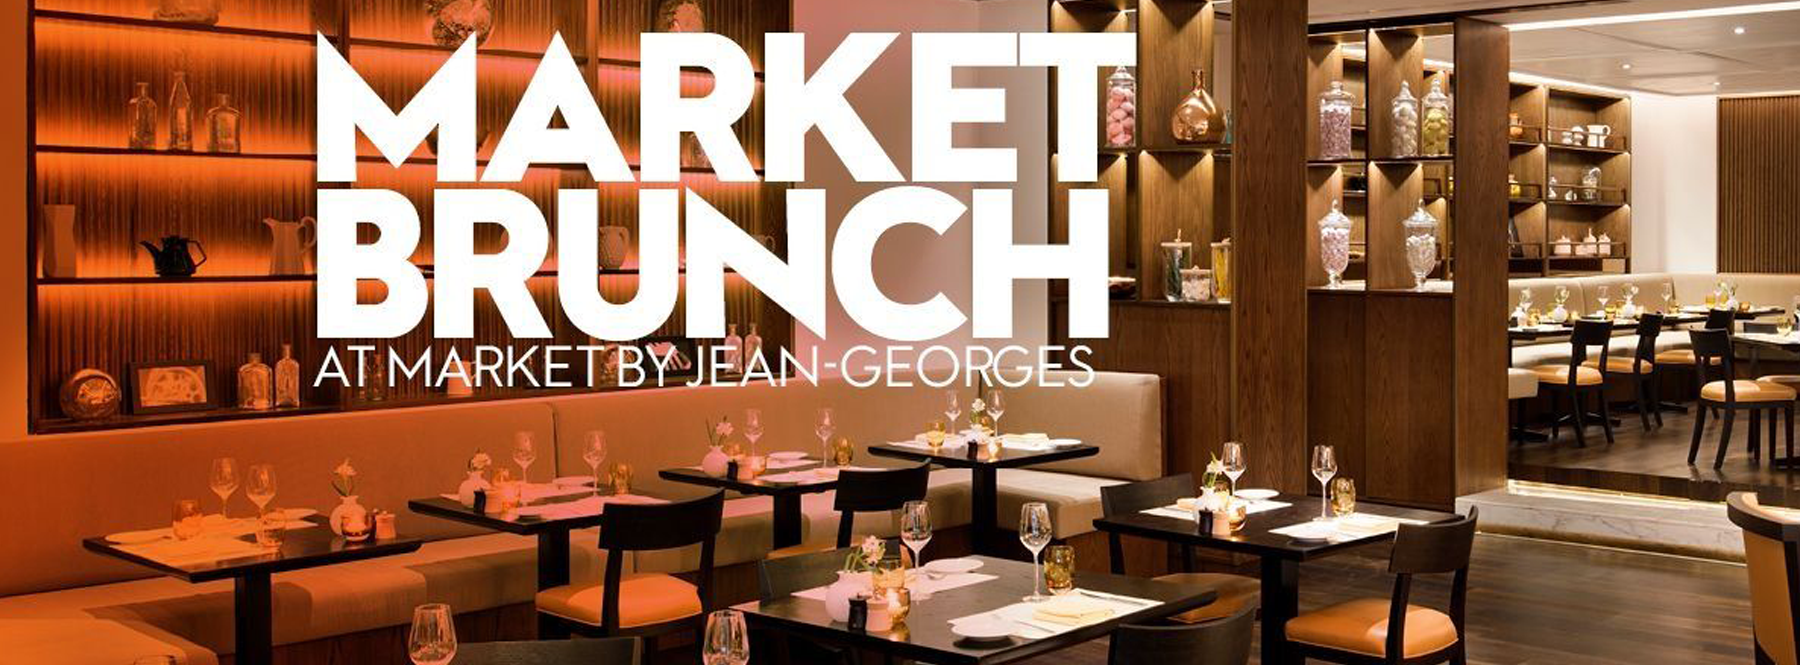 Spice Market by Jean-Georges Archives - Marhaba Qatar